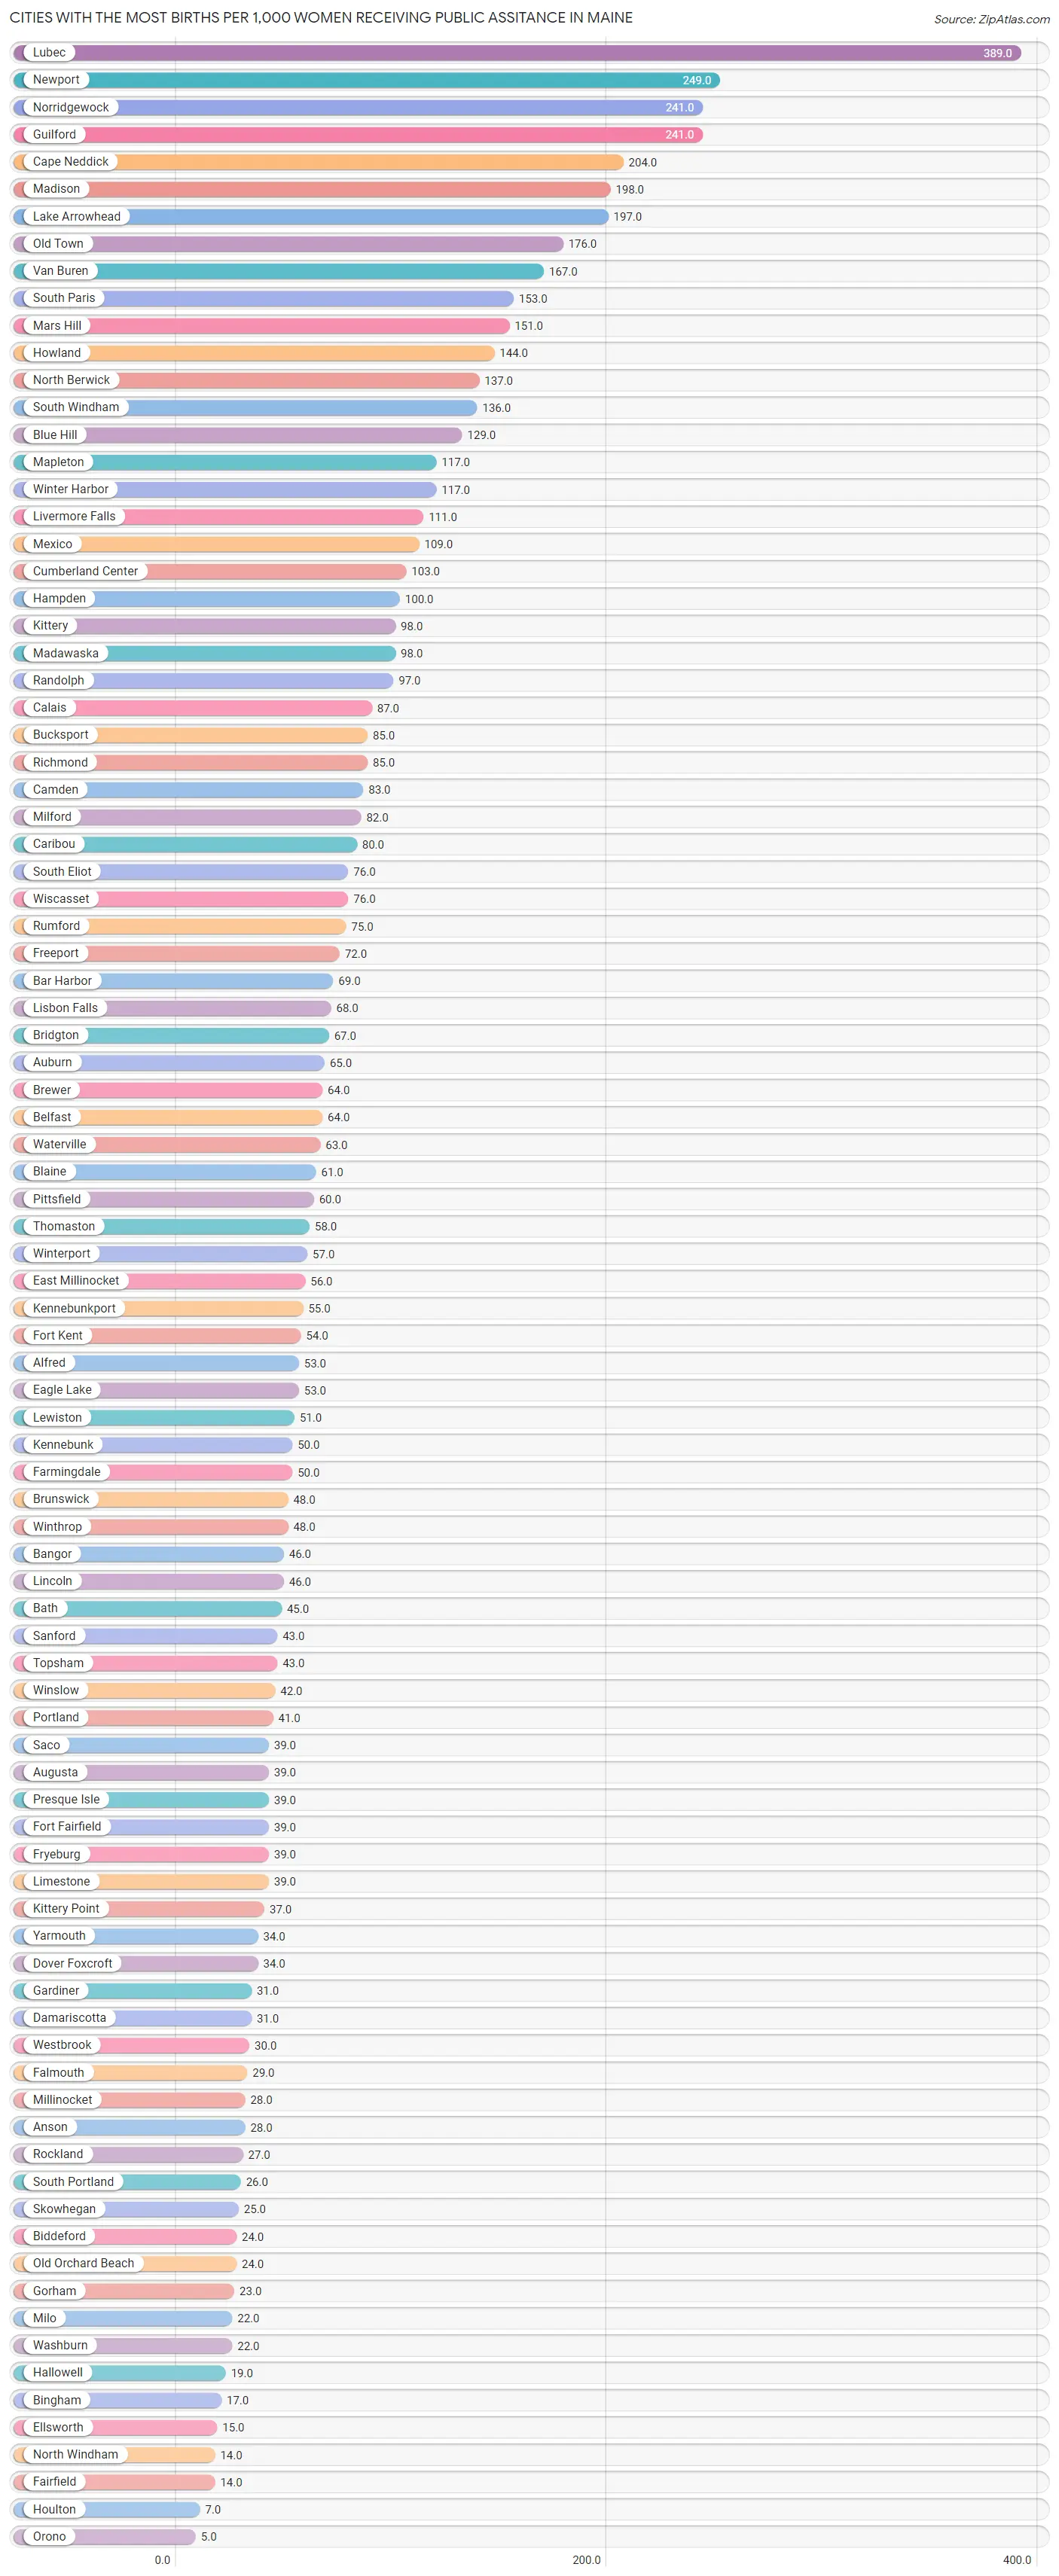 Cities with the Most Births per 1,000 Women Receiving Public Assitance in Maine Chart